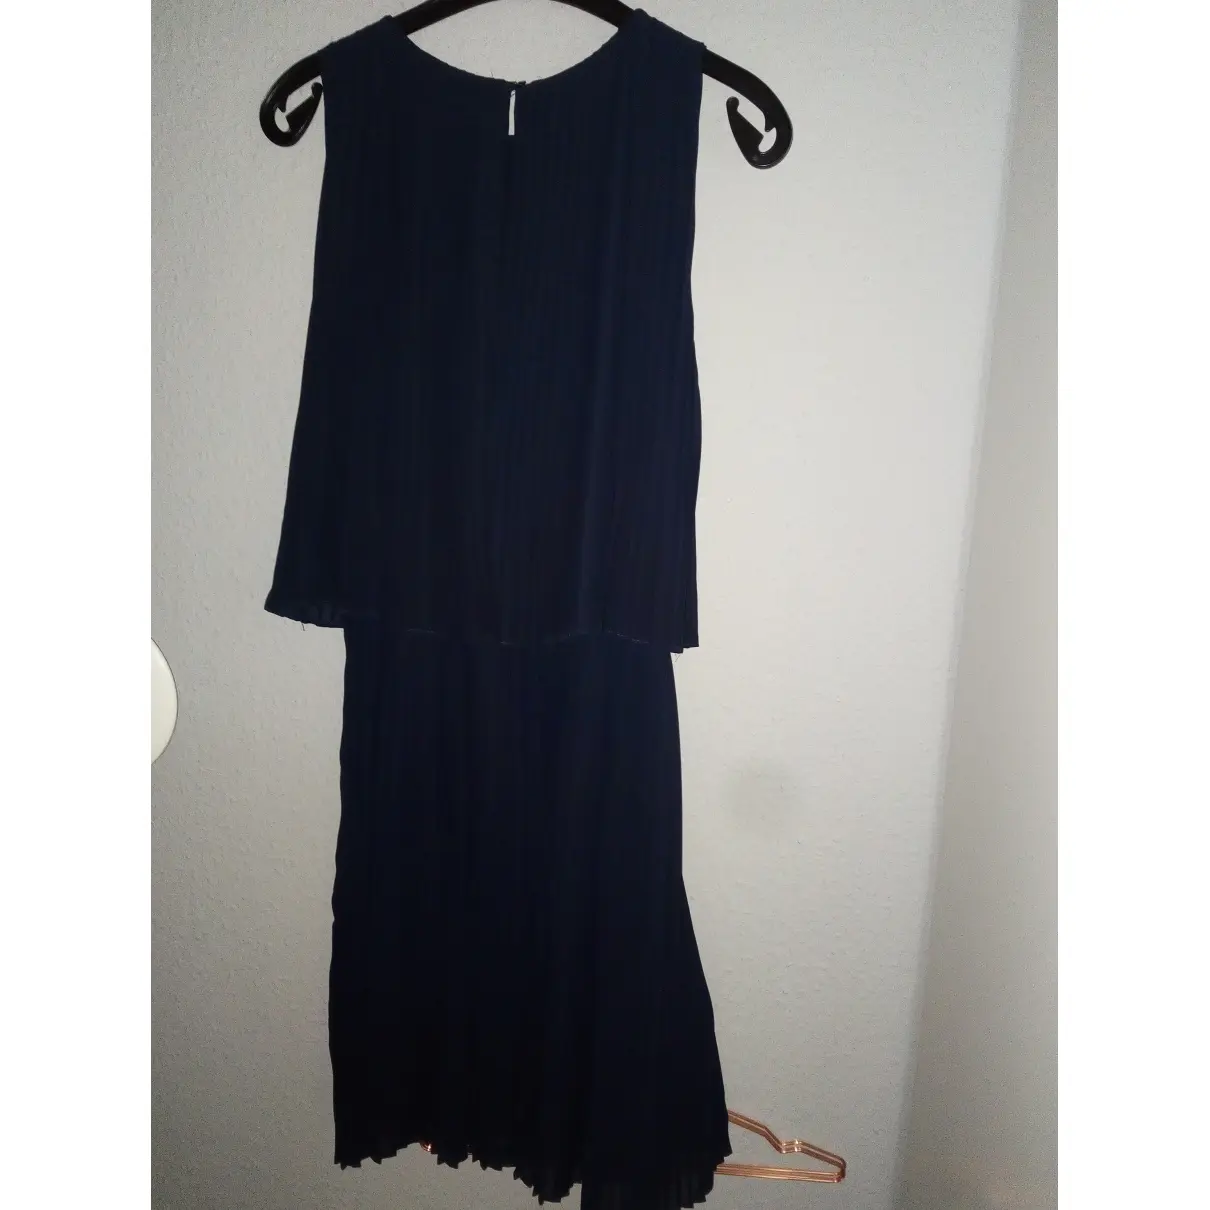 Selected Mid-length dress for sale